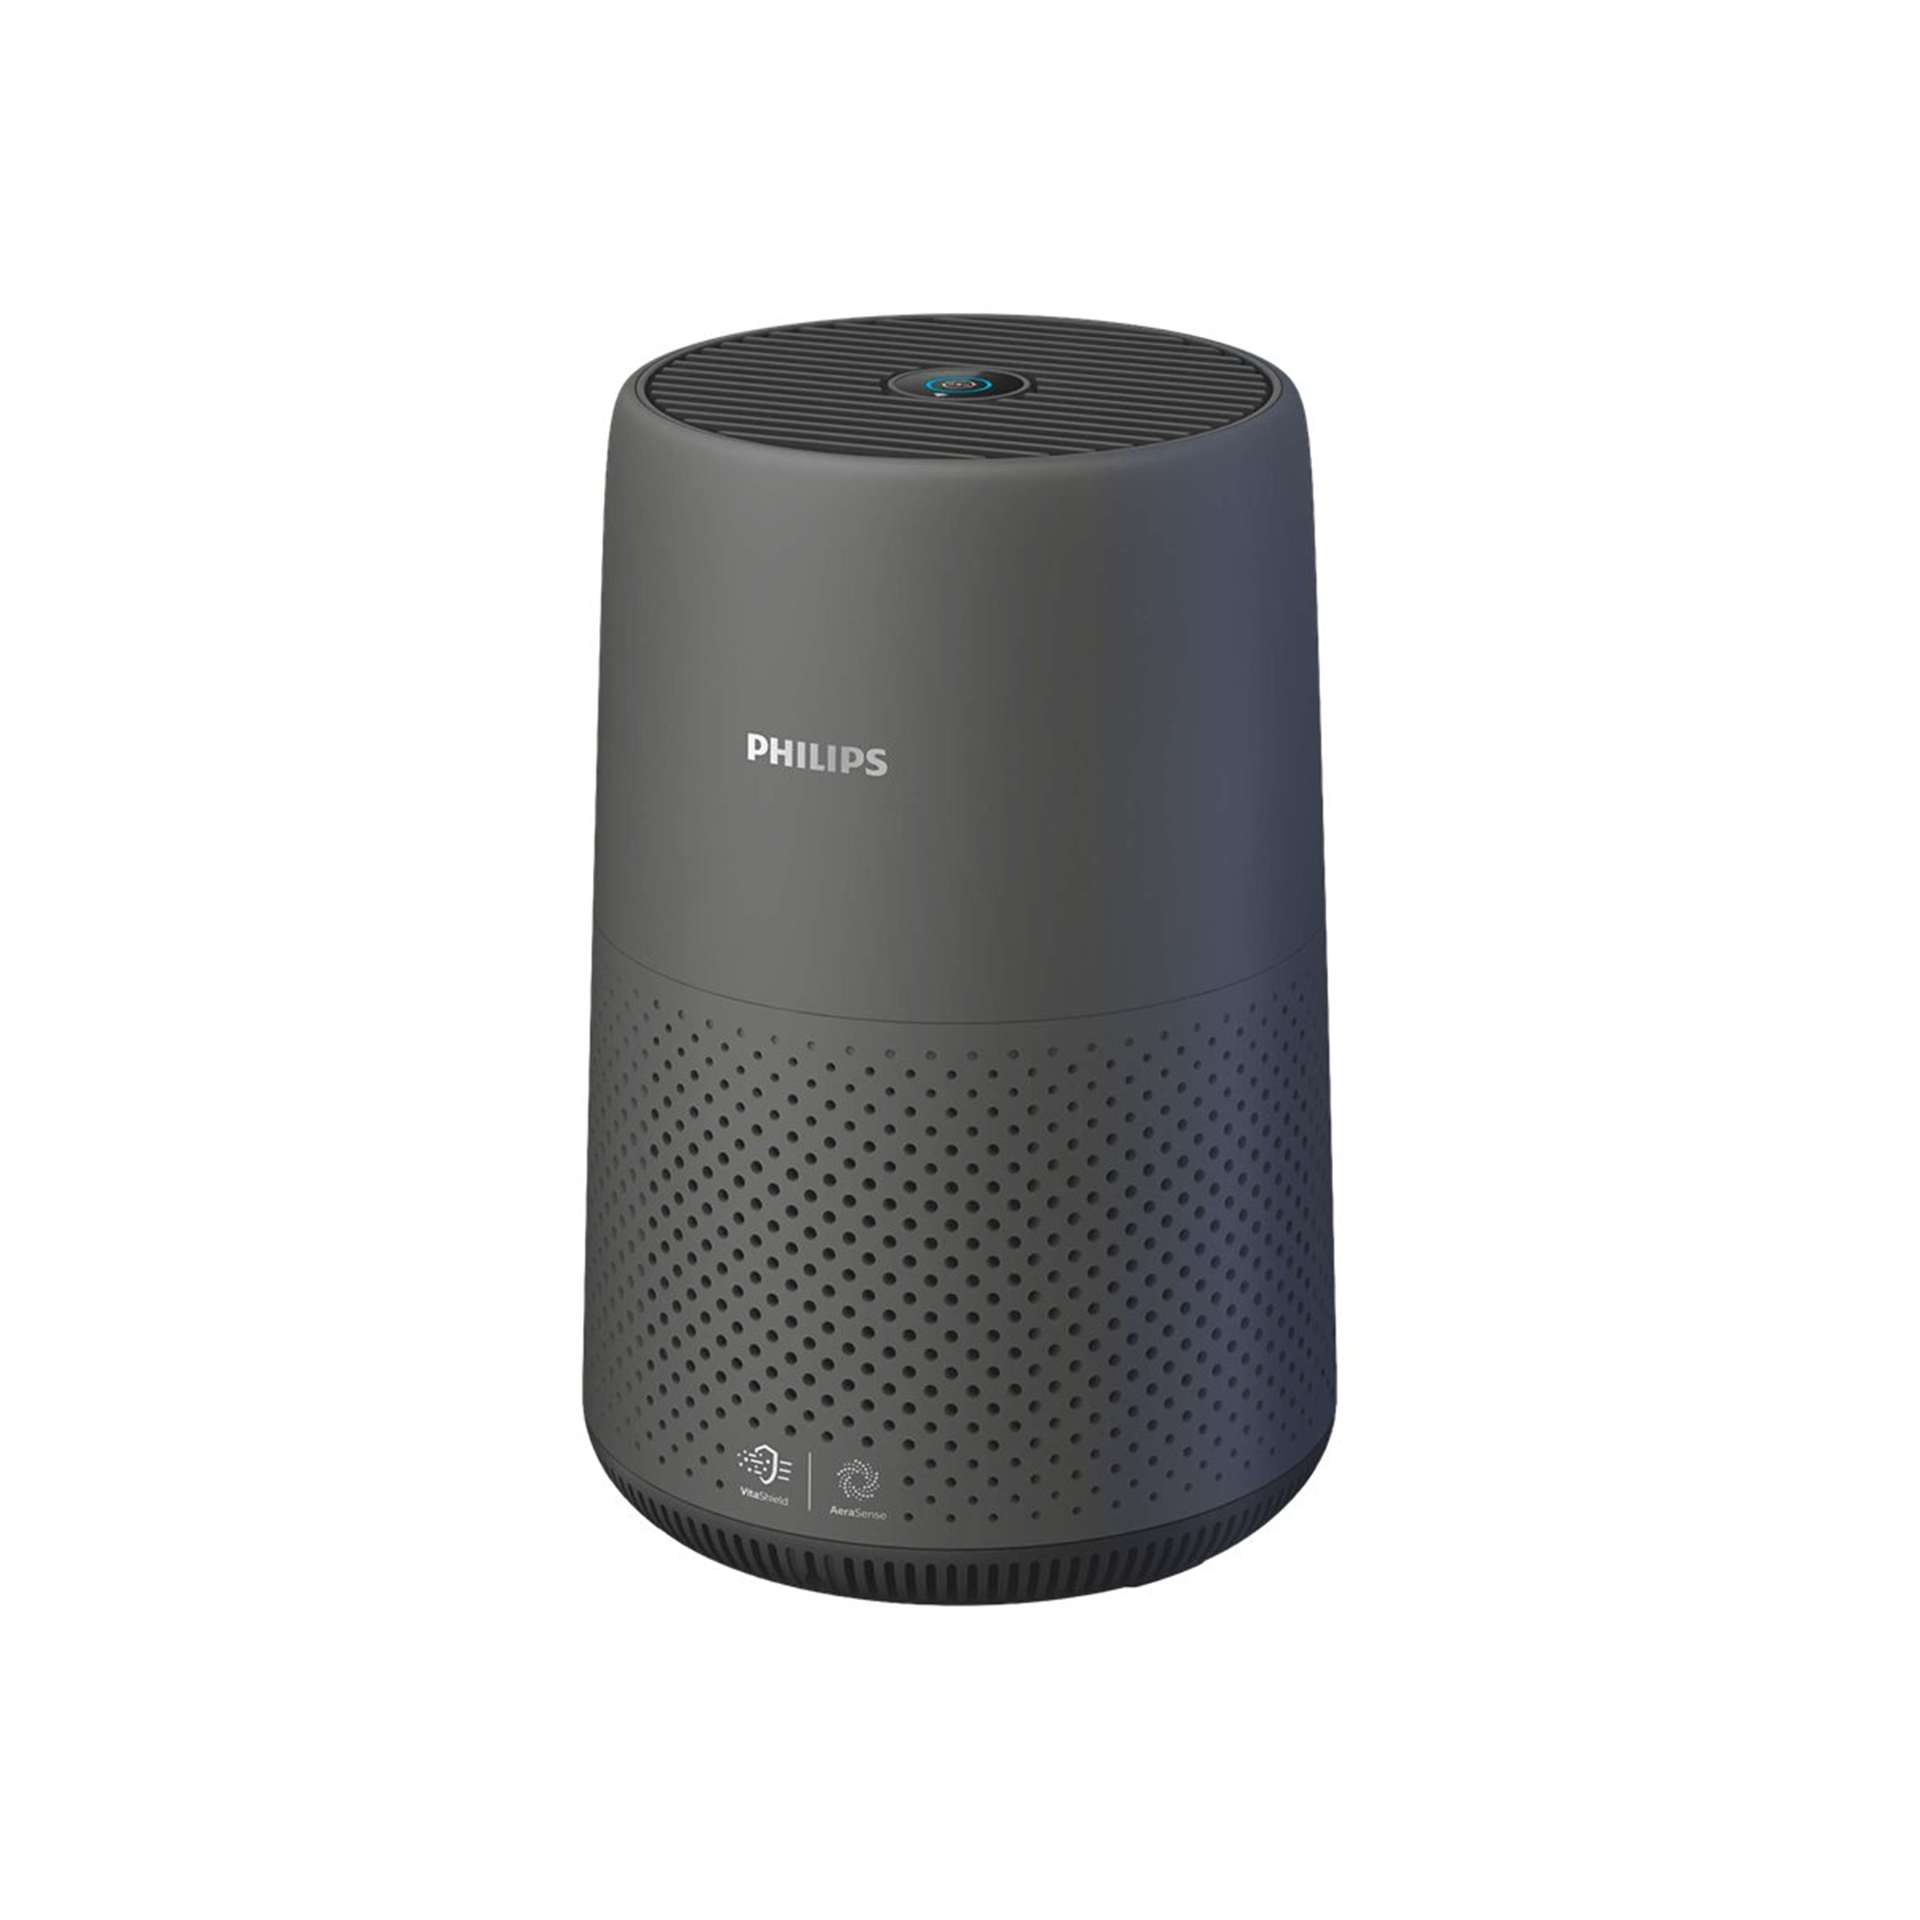 Philips AC0850/11 Compact Air Purifier, Black Philips